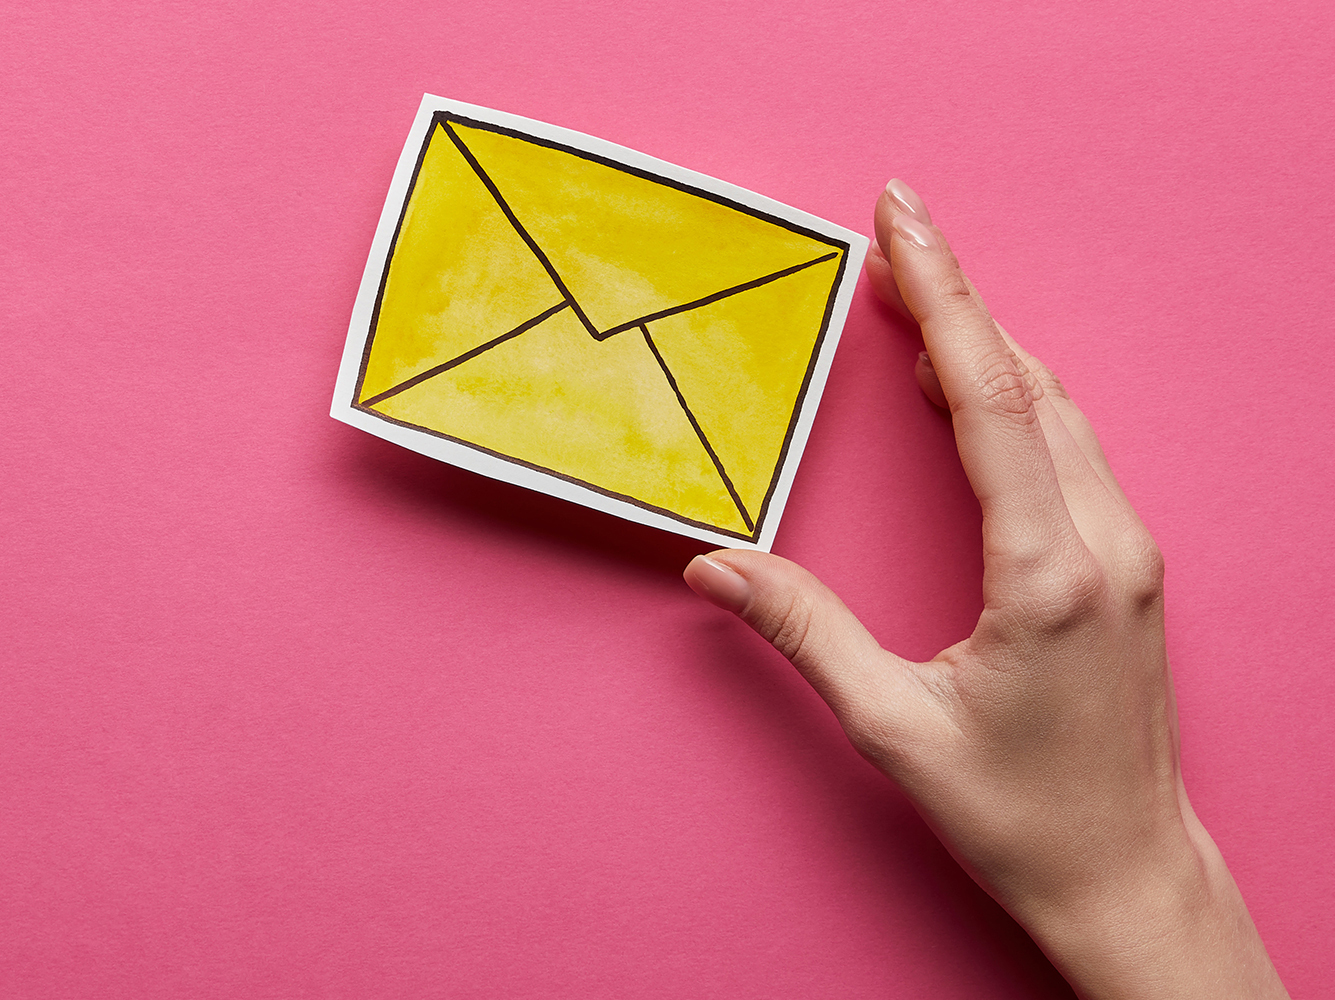 Heading for 5 Steps to Send Better Visually Appealing Emails That Convert